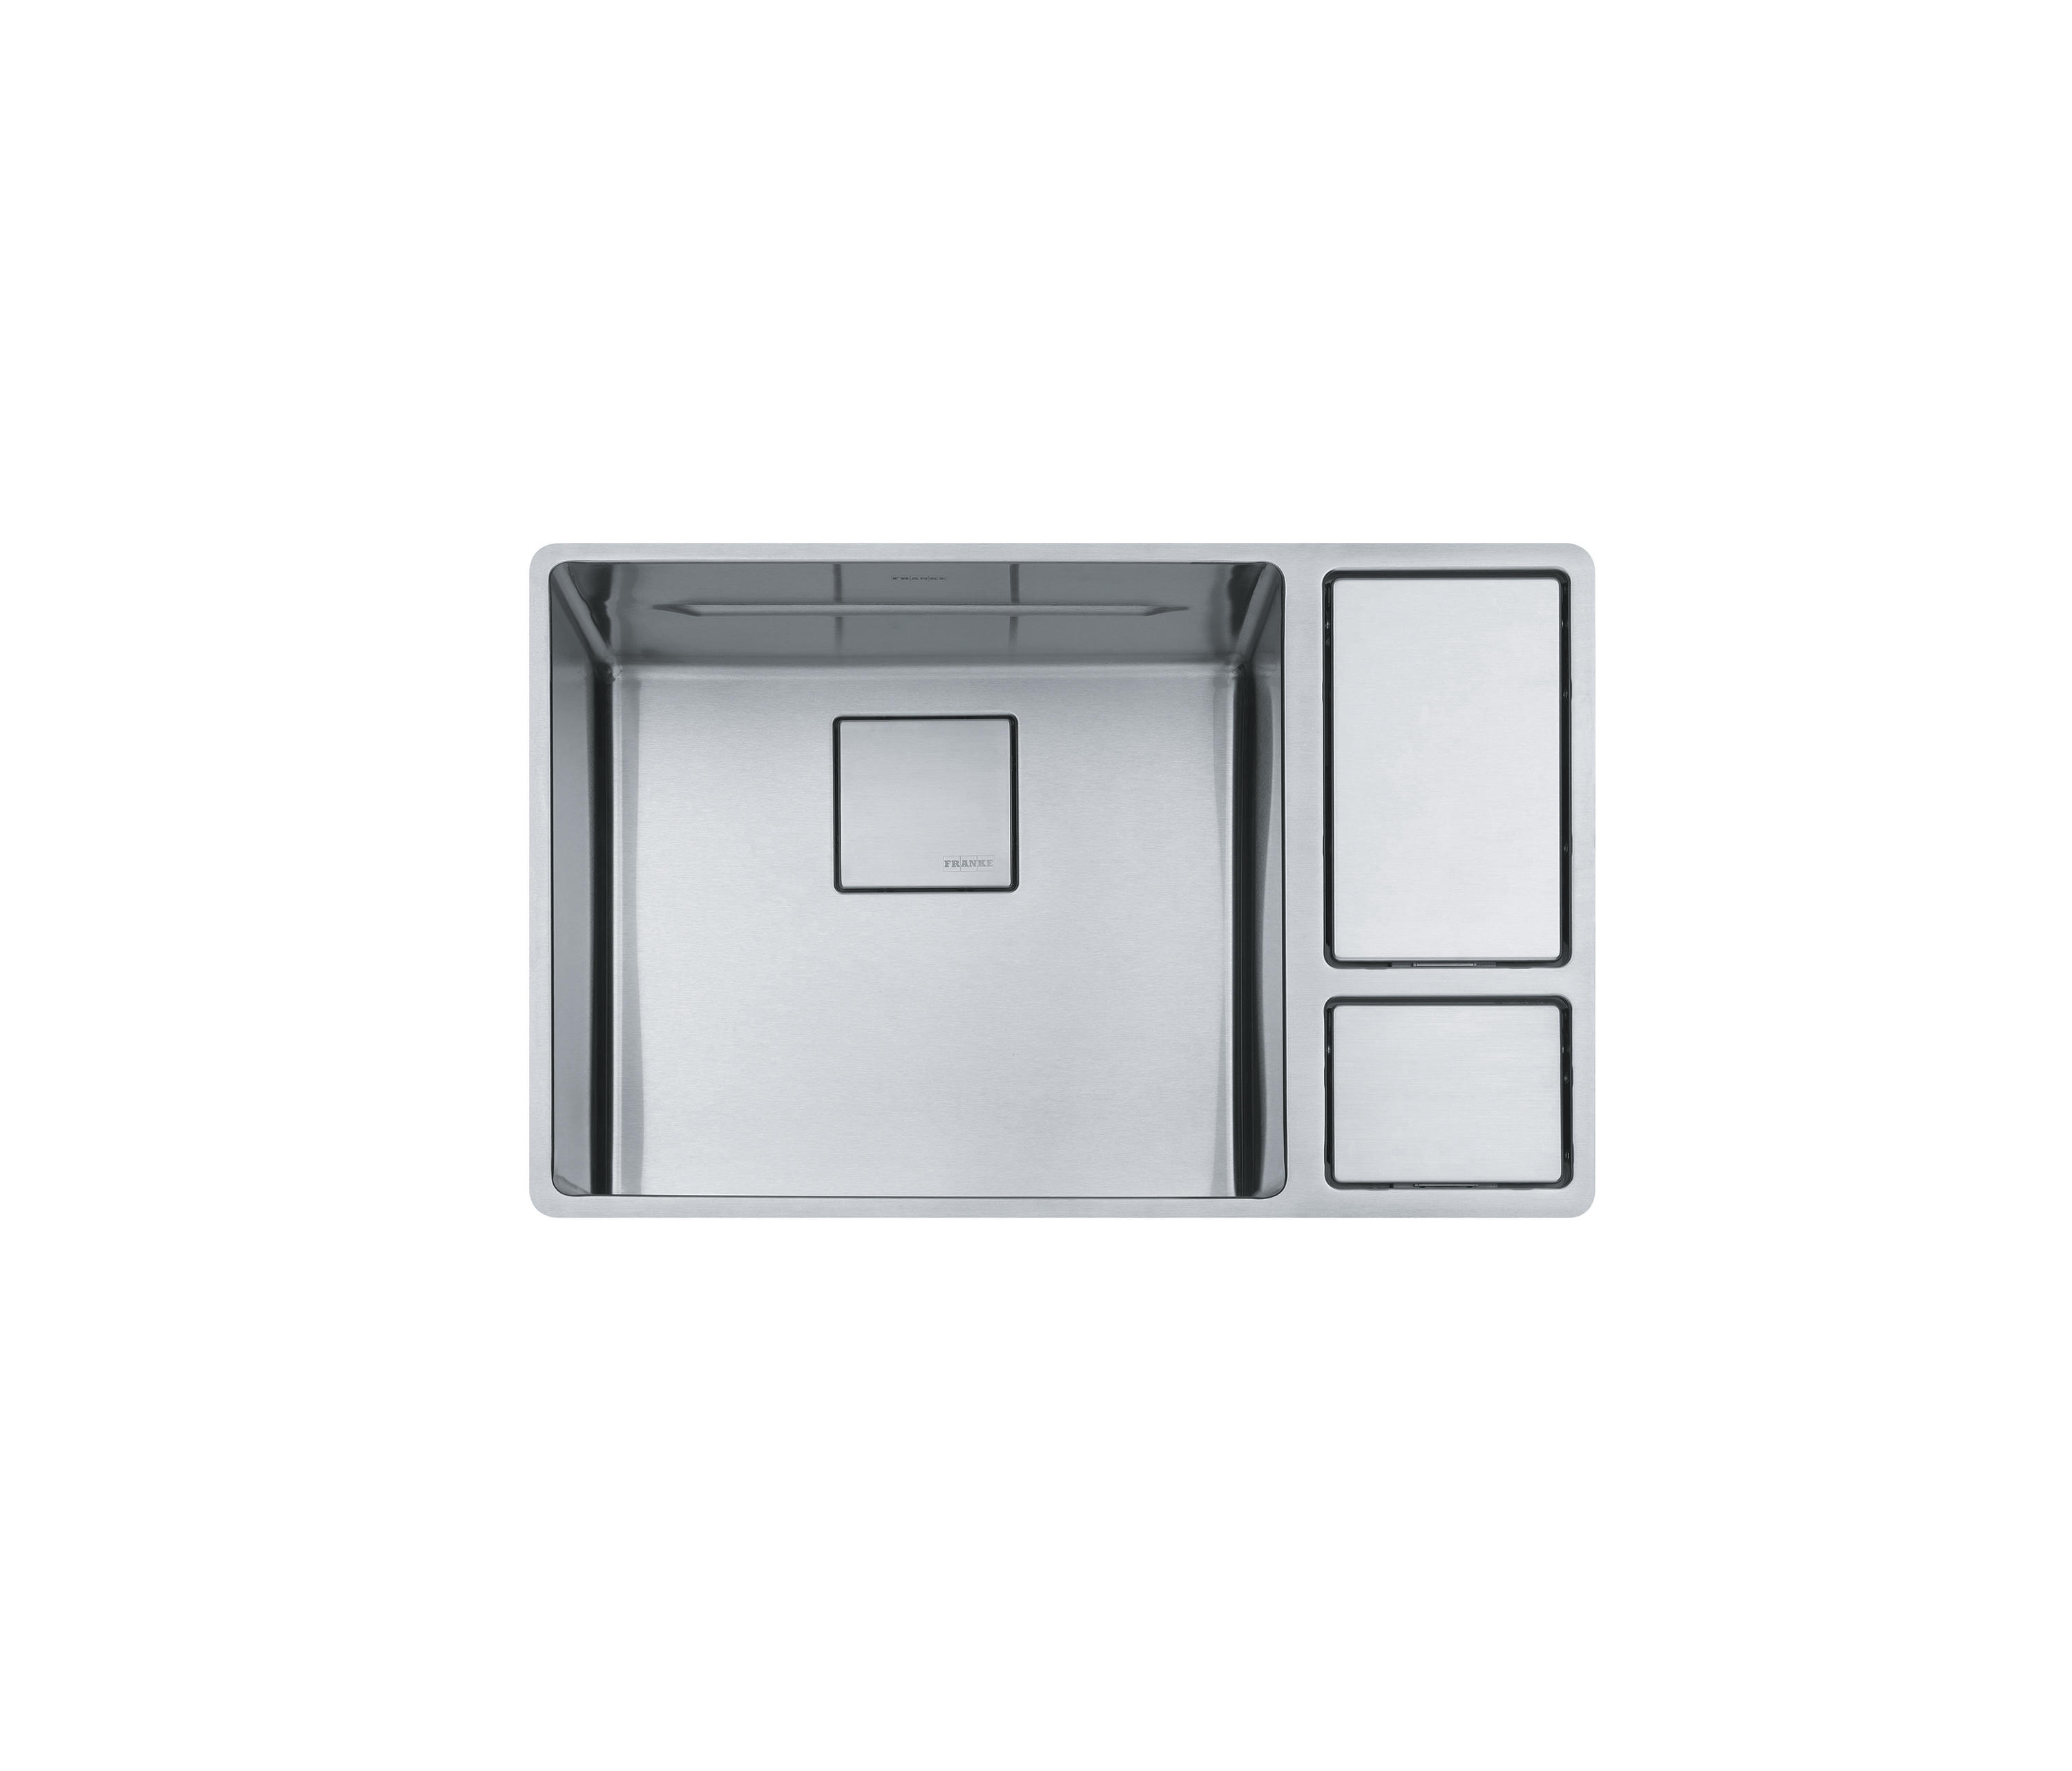 Chef Center Sinks Stainless Steel Architonic